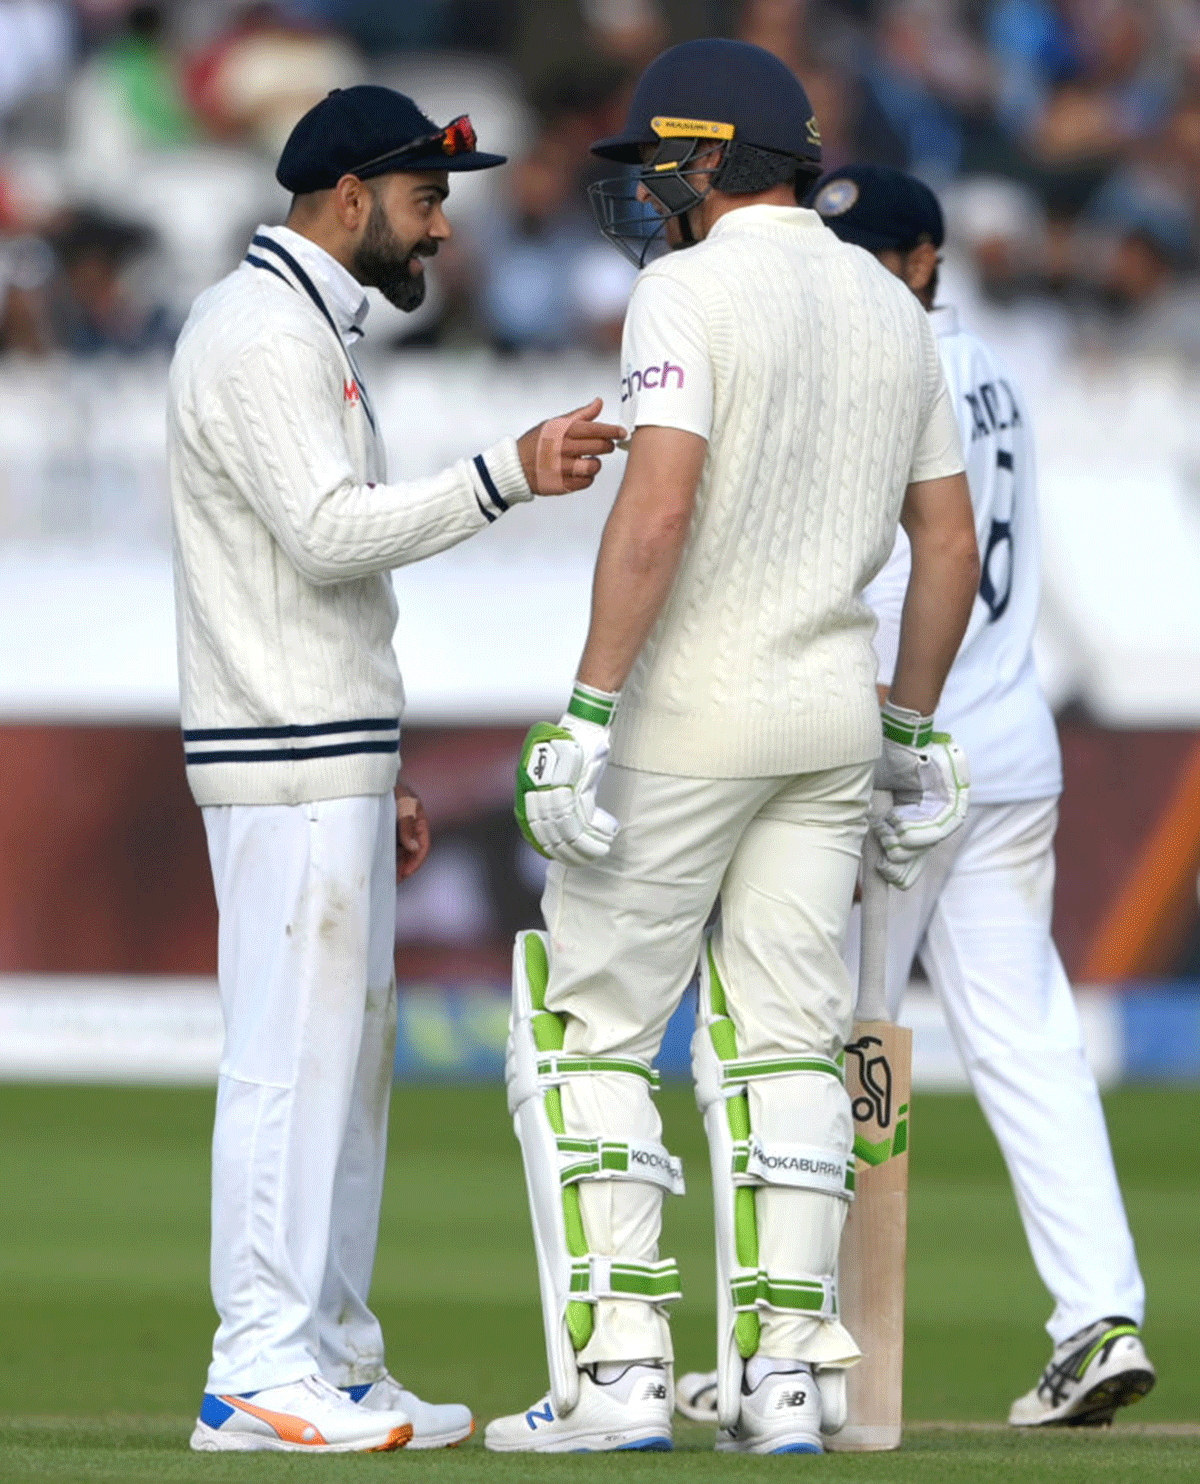 Virat Kohli and Jos Buttler get into a confrontation during Day 5 of the Lord's Test on on August 16, 2021 in London